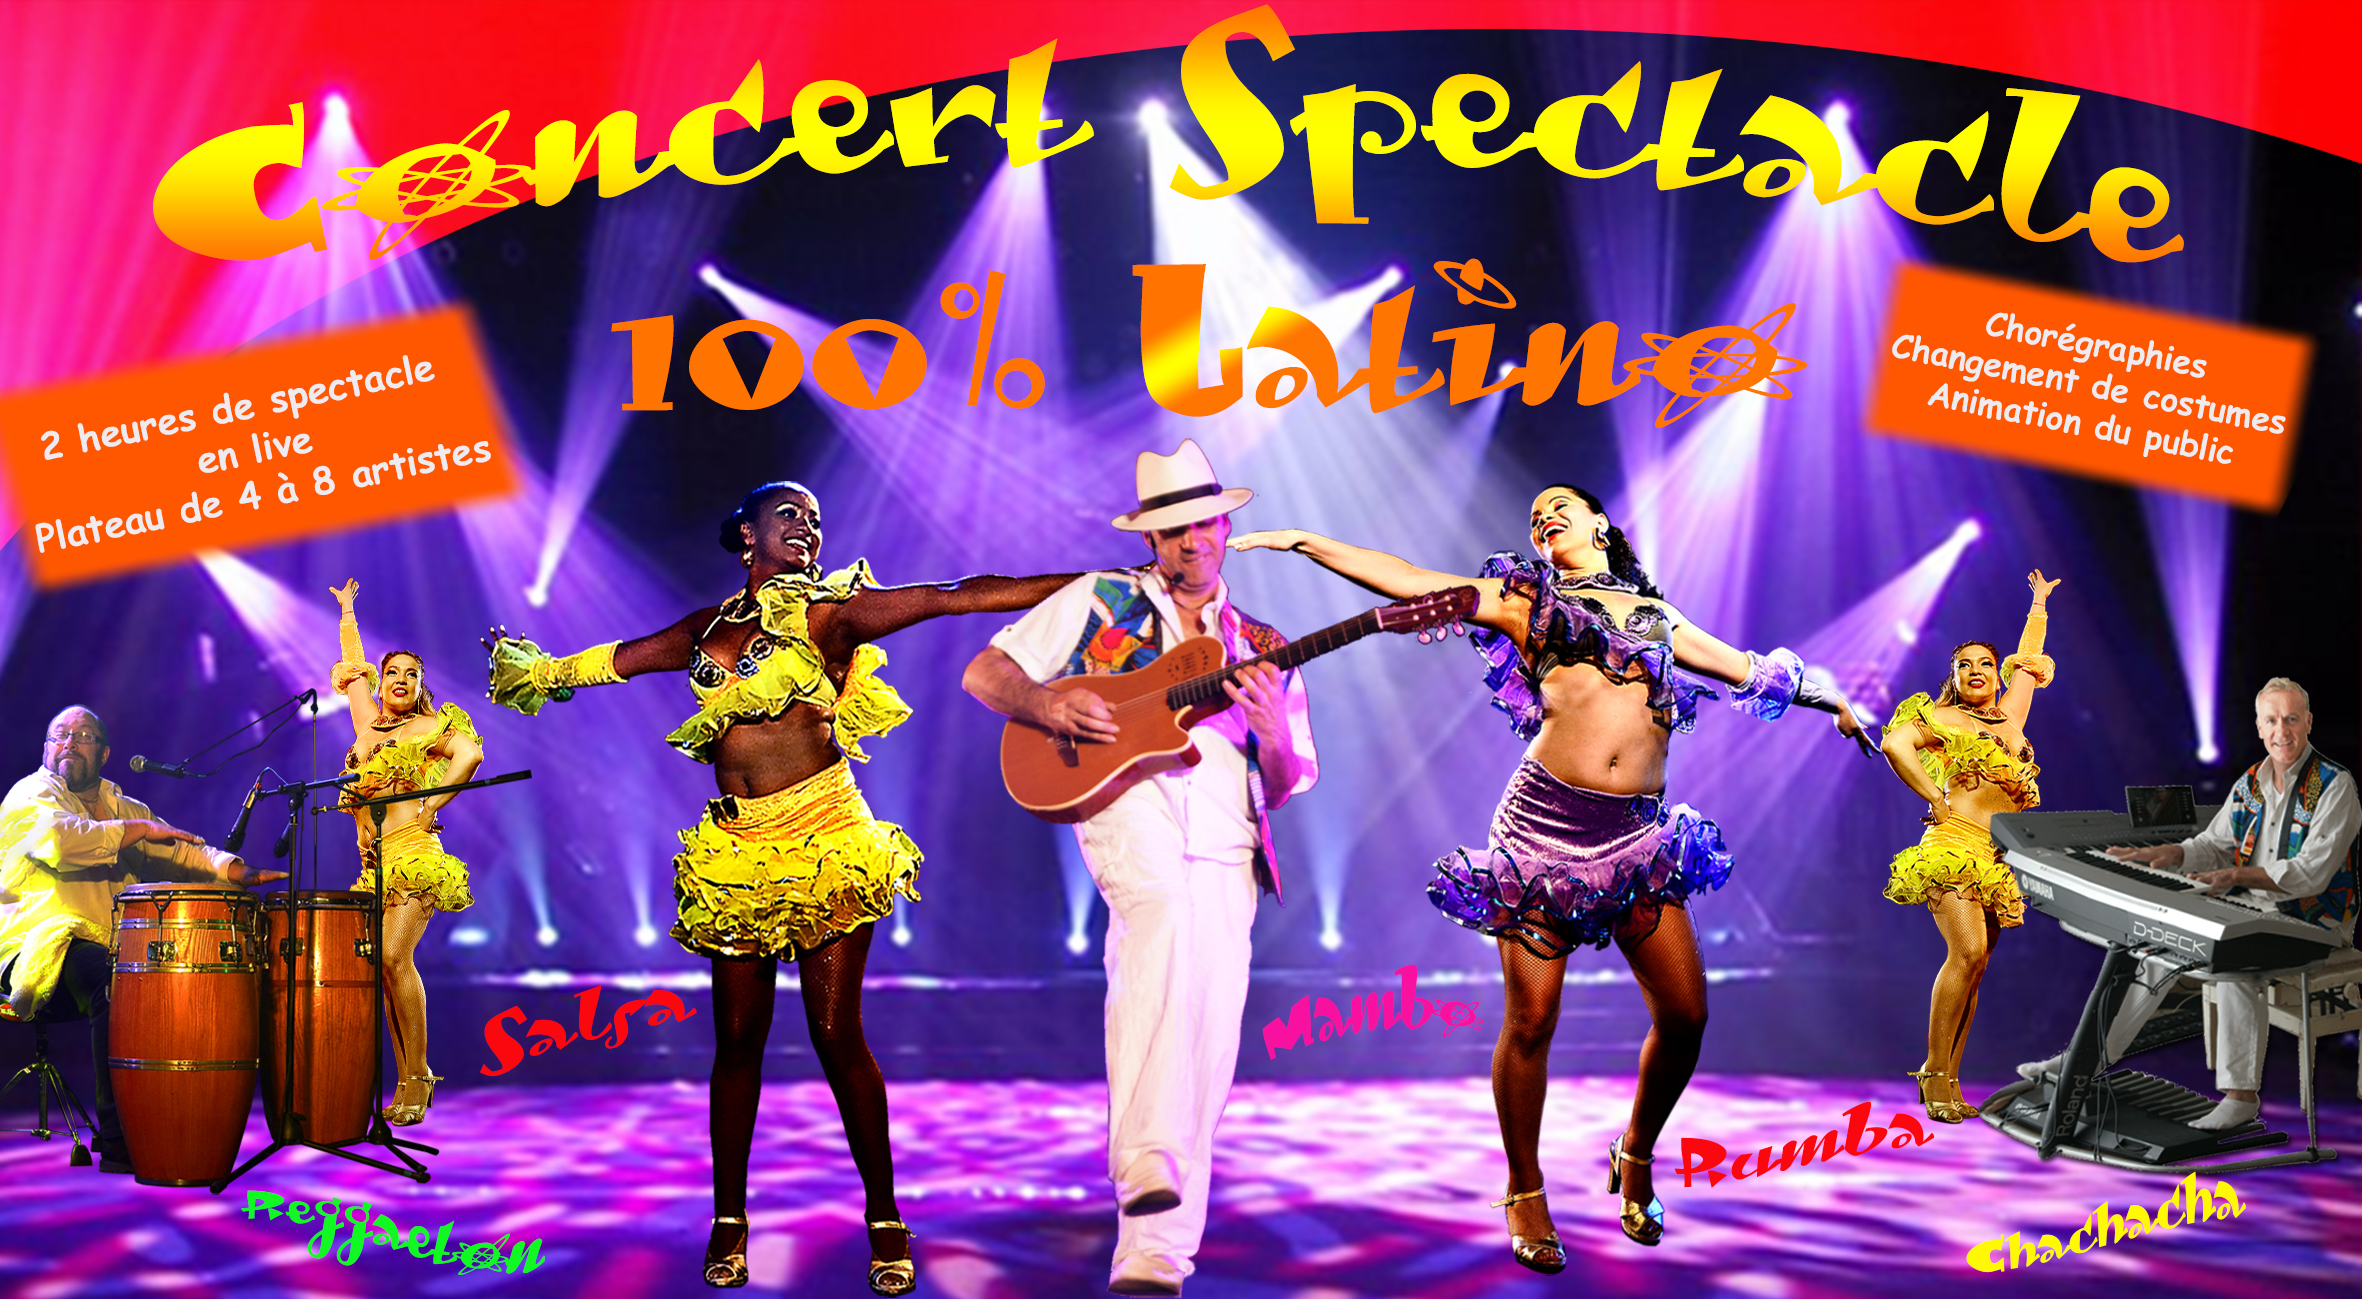 SPECTACLE -CONCERT 100% LATINO